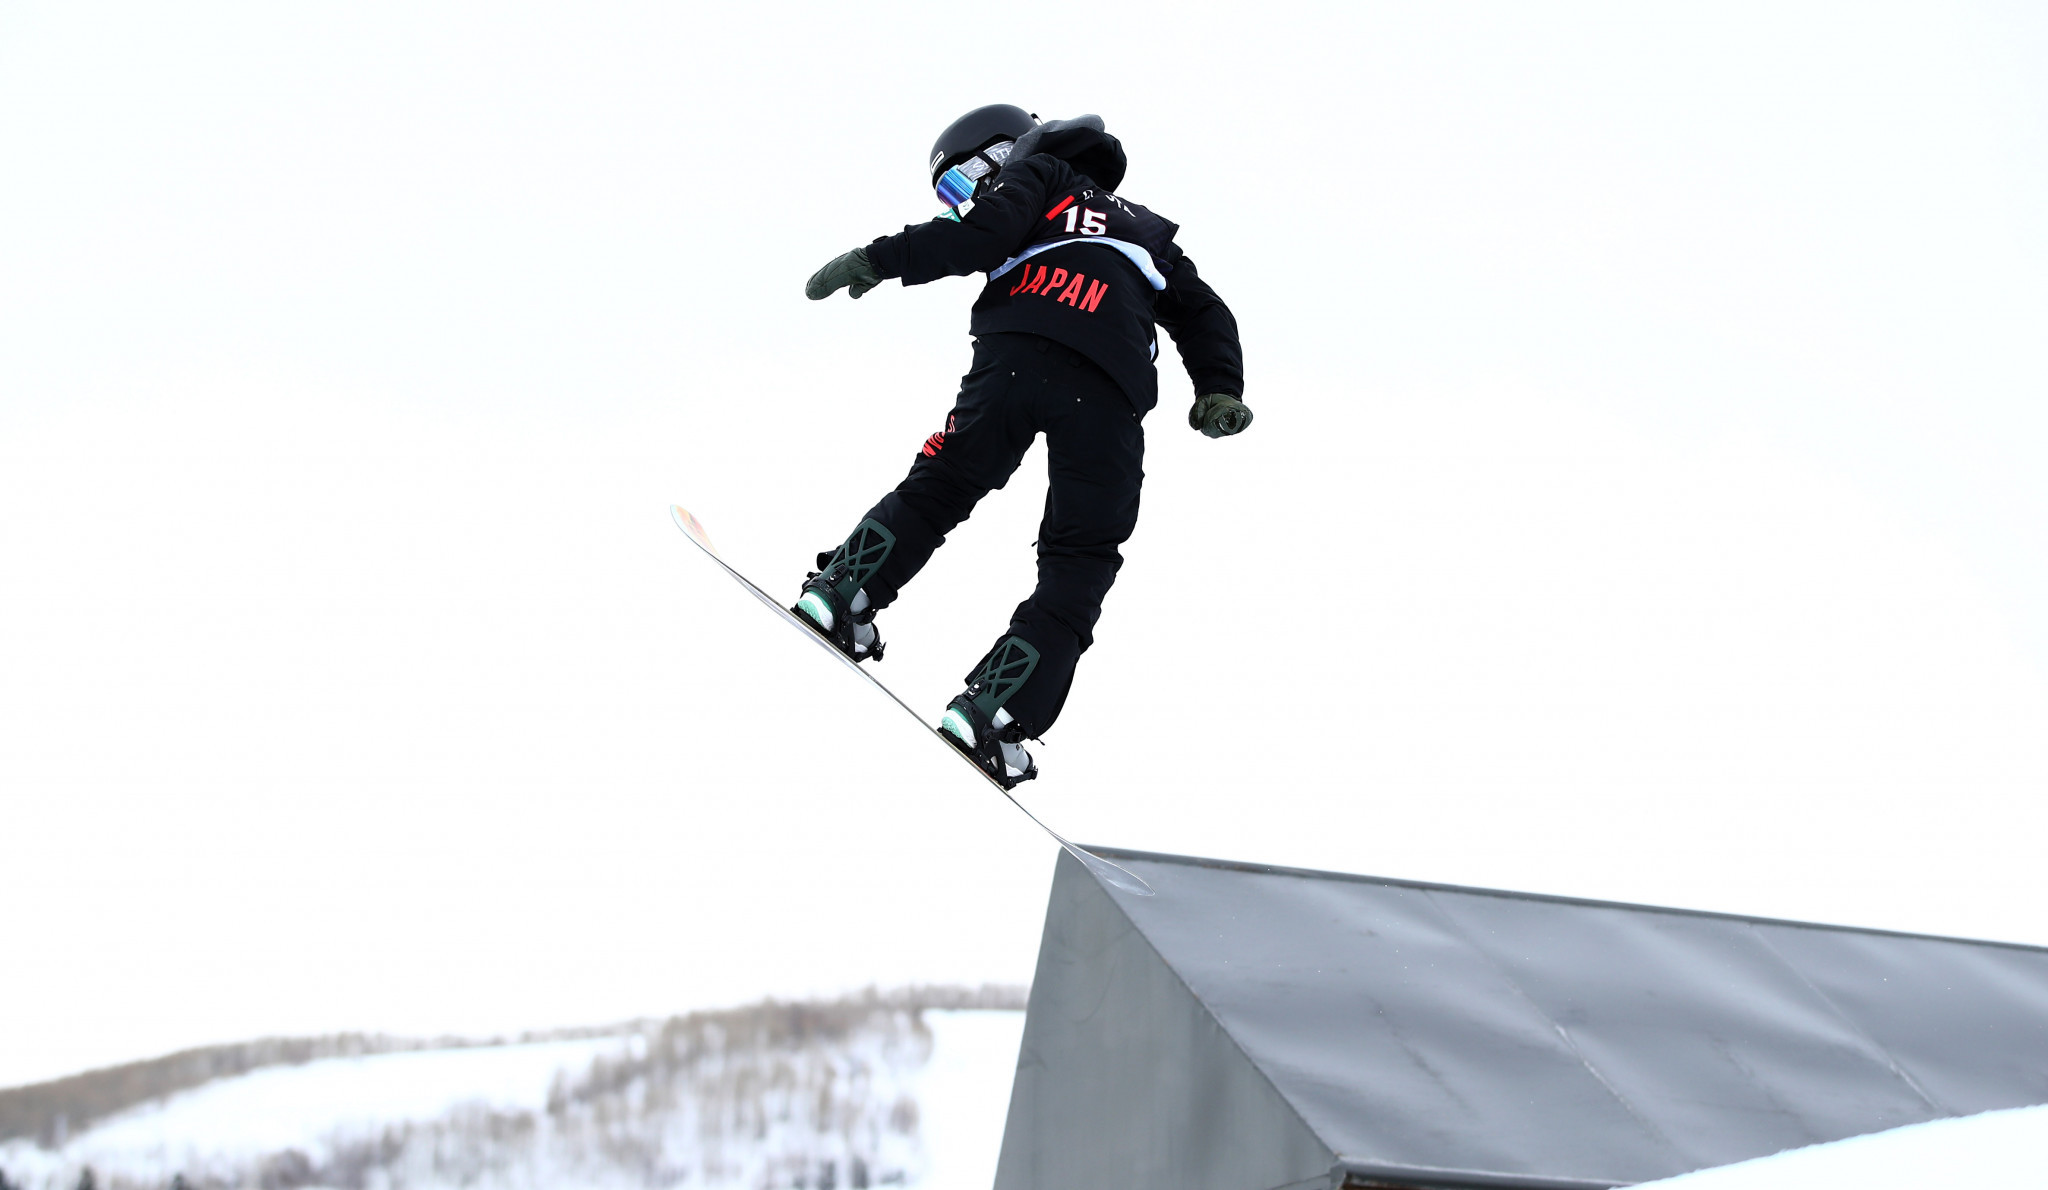 Kunitake and Vicktor qualify first from slopestyle heats at FIS Snowboard World Cup